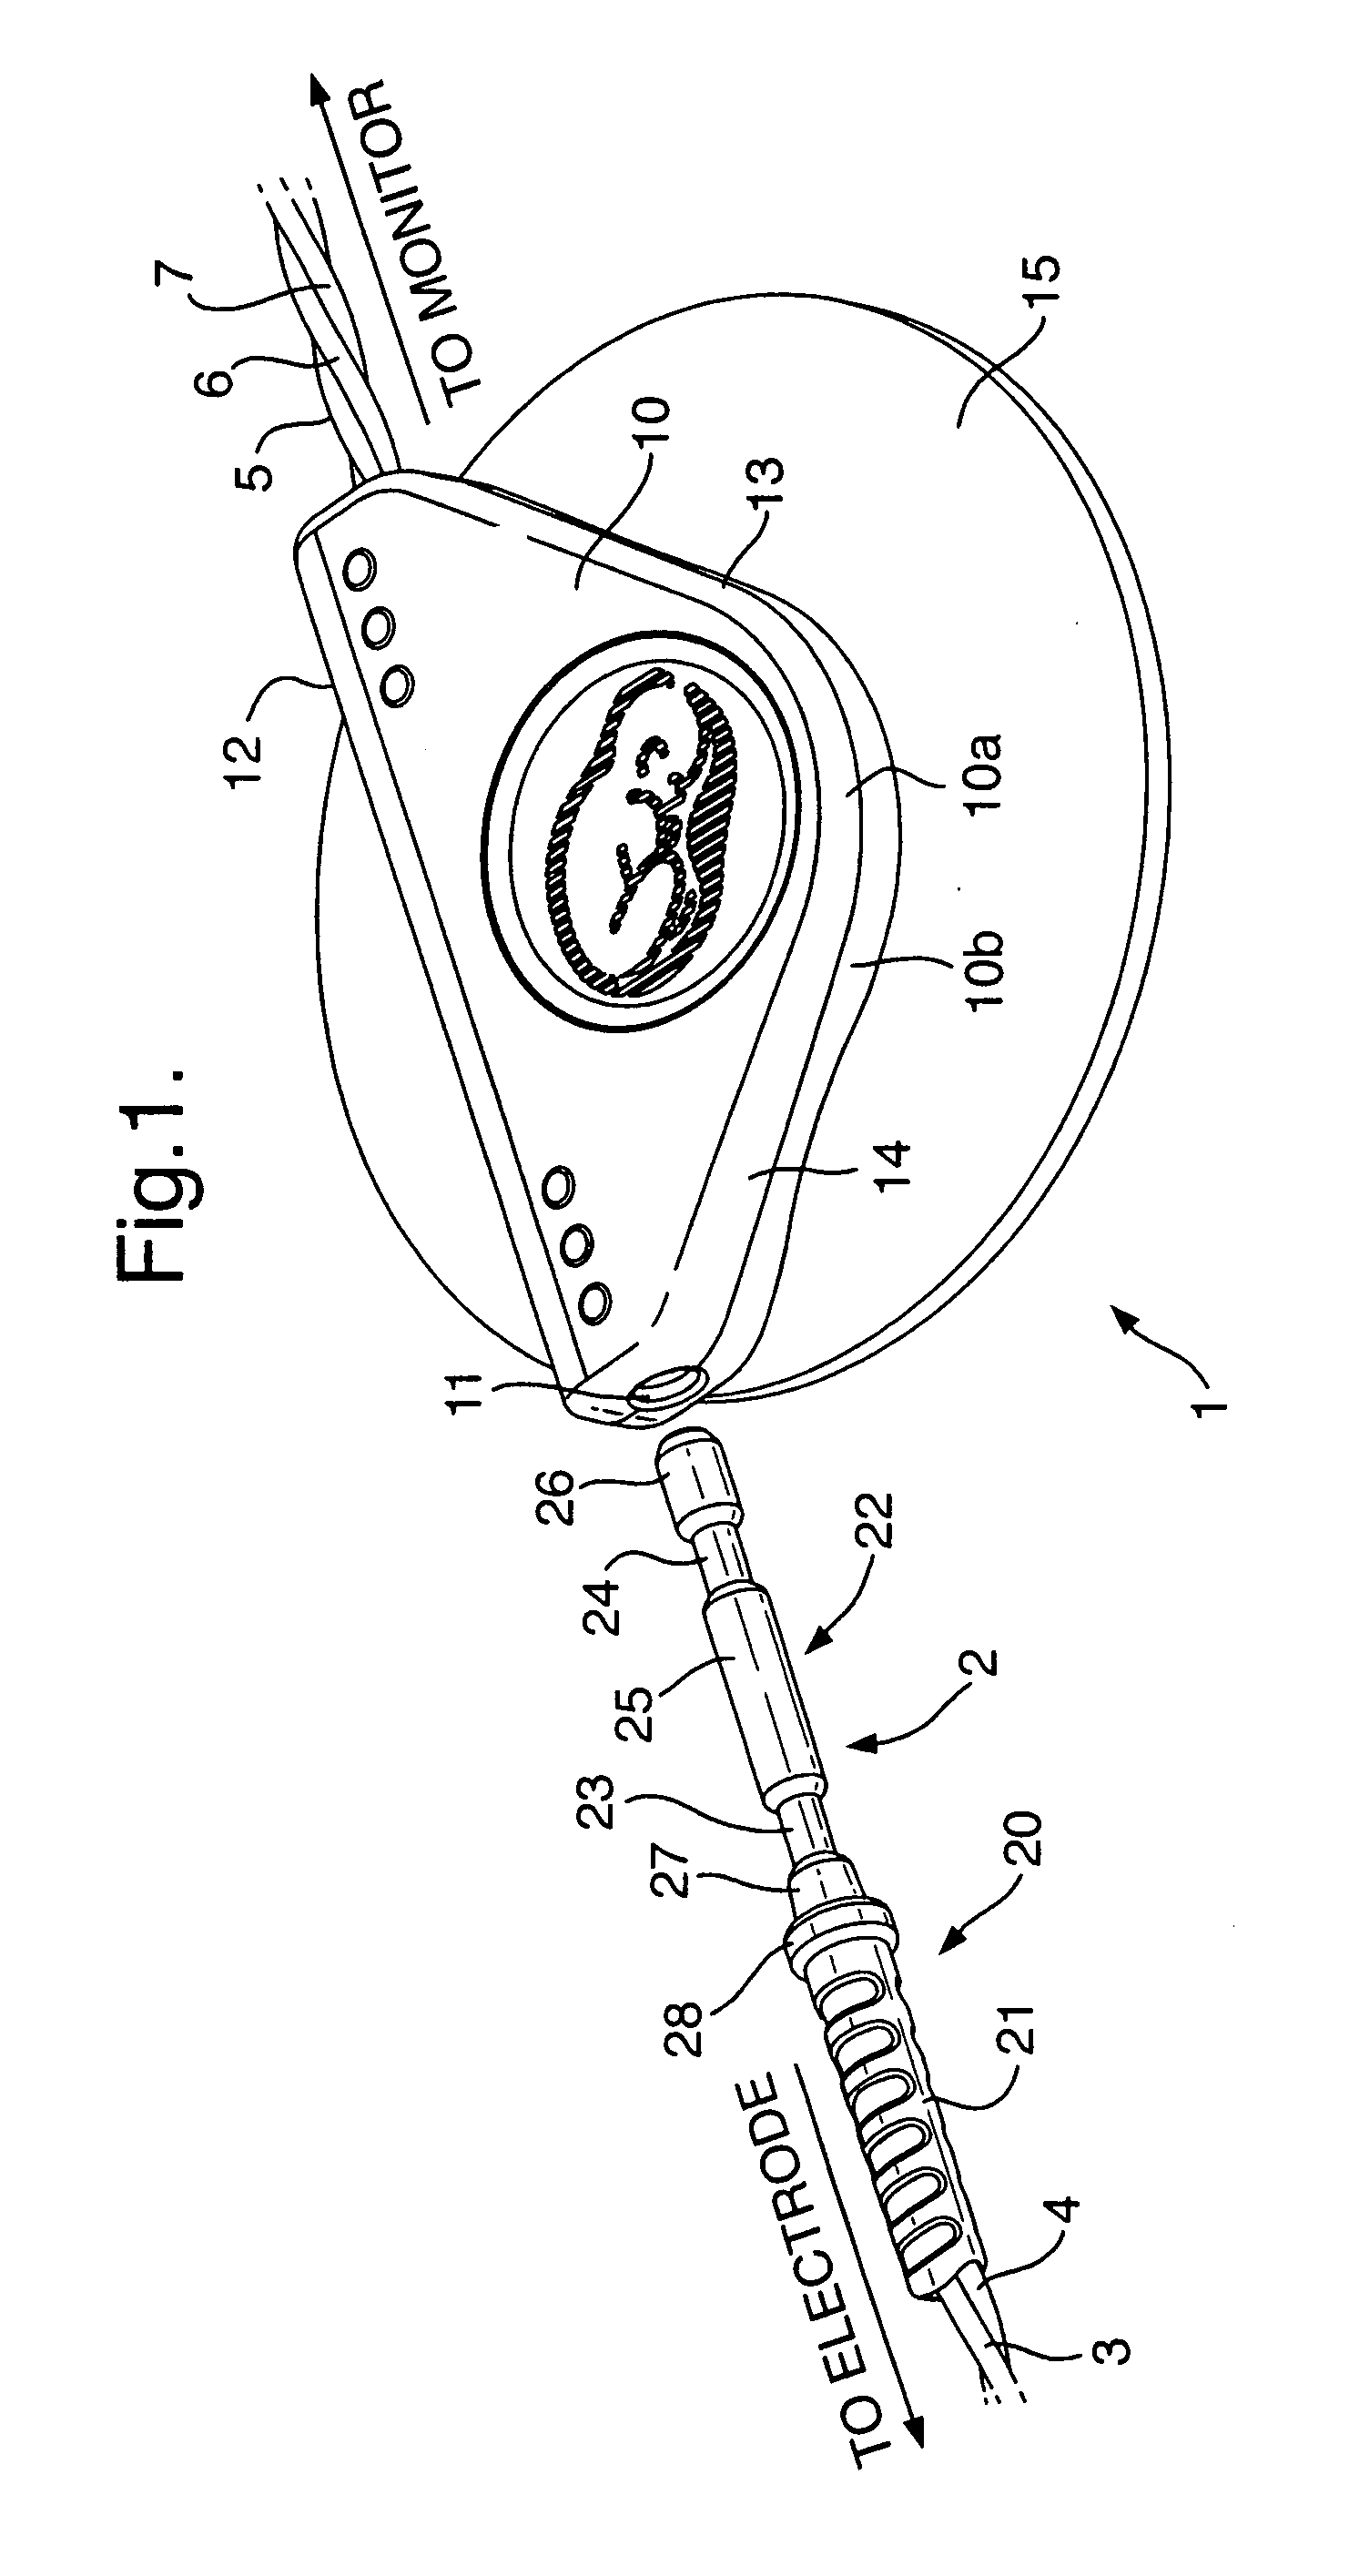 Single-use connection system for a fetal electrode